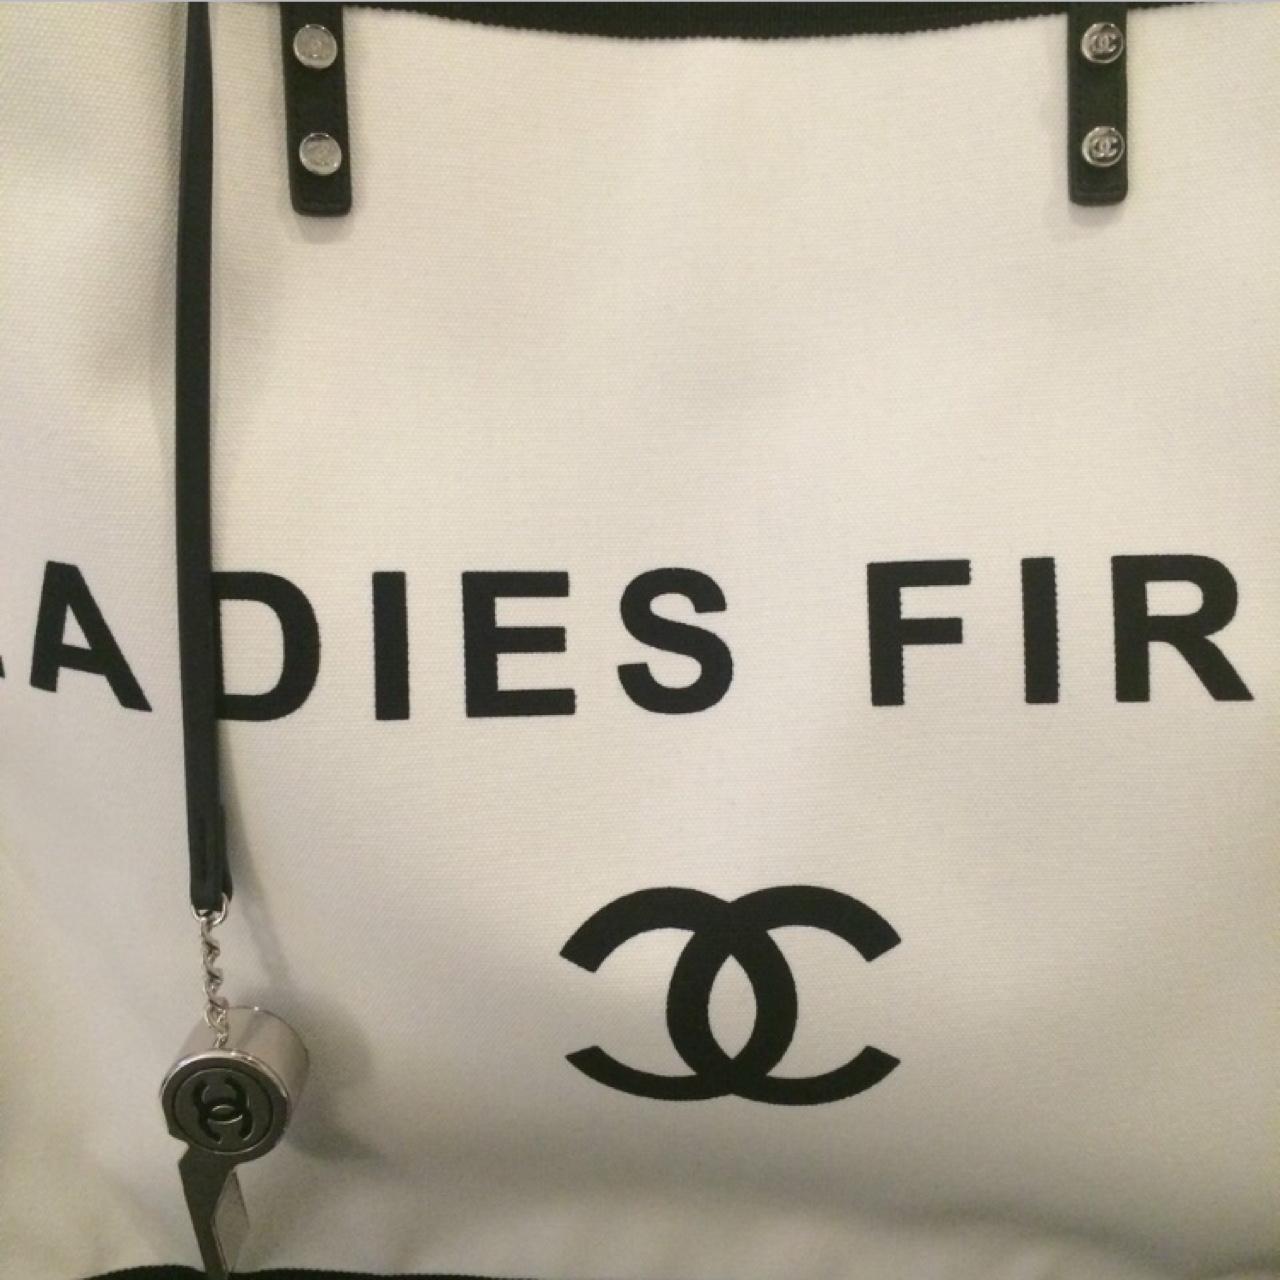 chanel bag ladies first